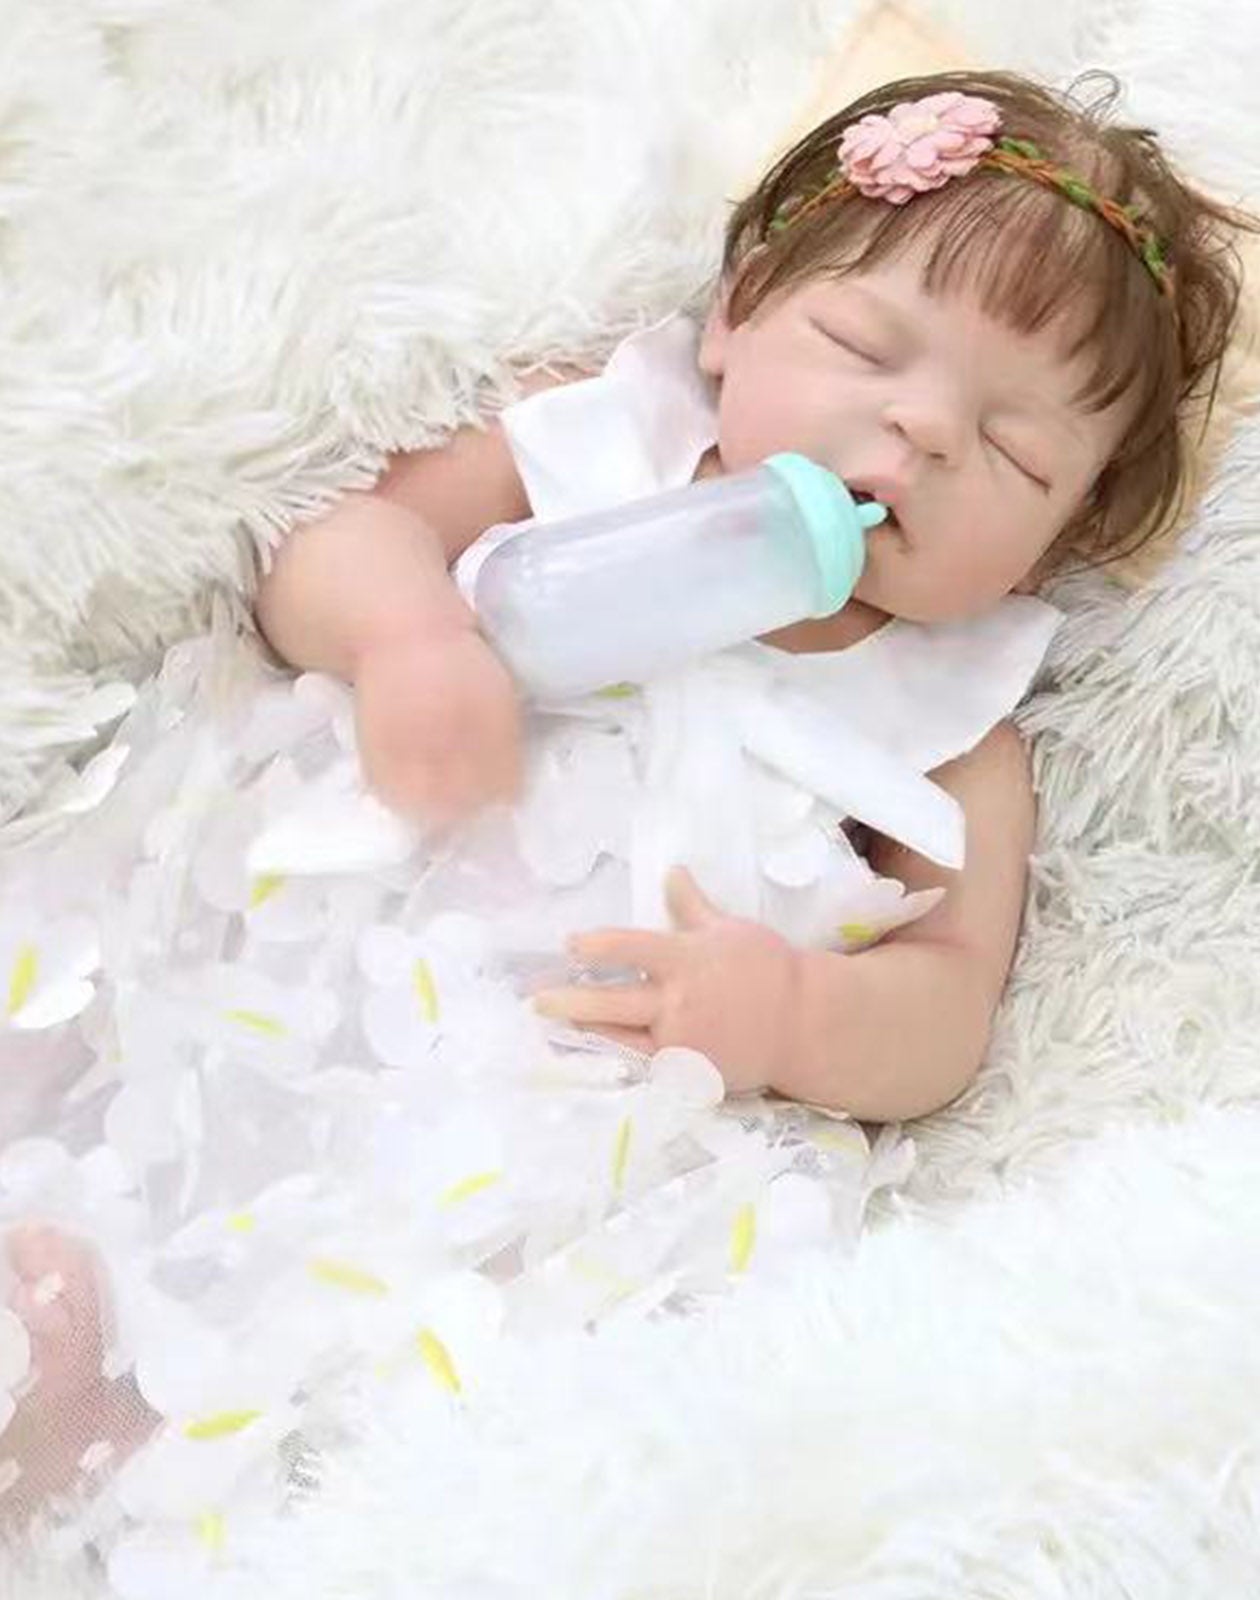 Laura - 22" Full Silicone Reborn Baby Dolls Lifelike Weighted Toddler Girl With Soft Touch Cuddly Body